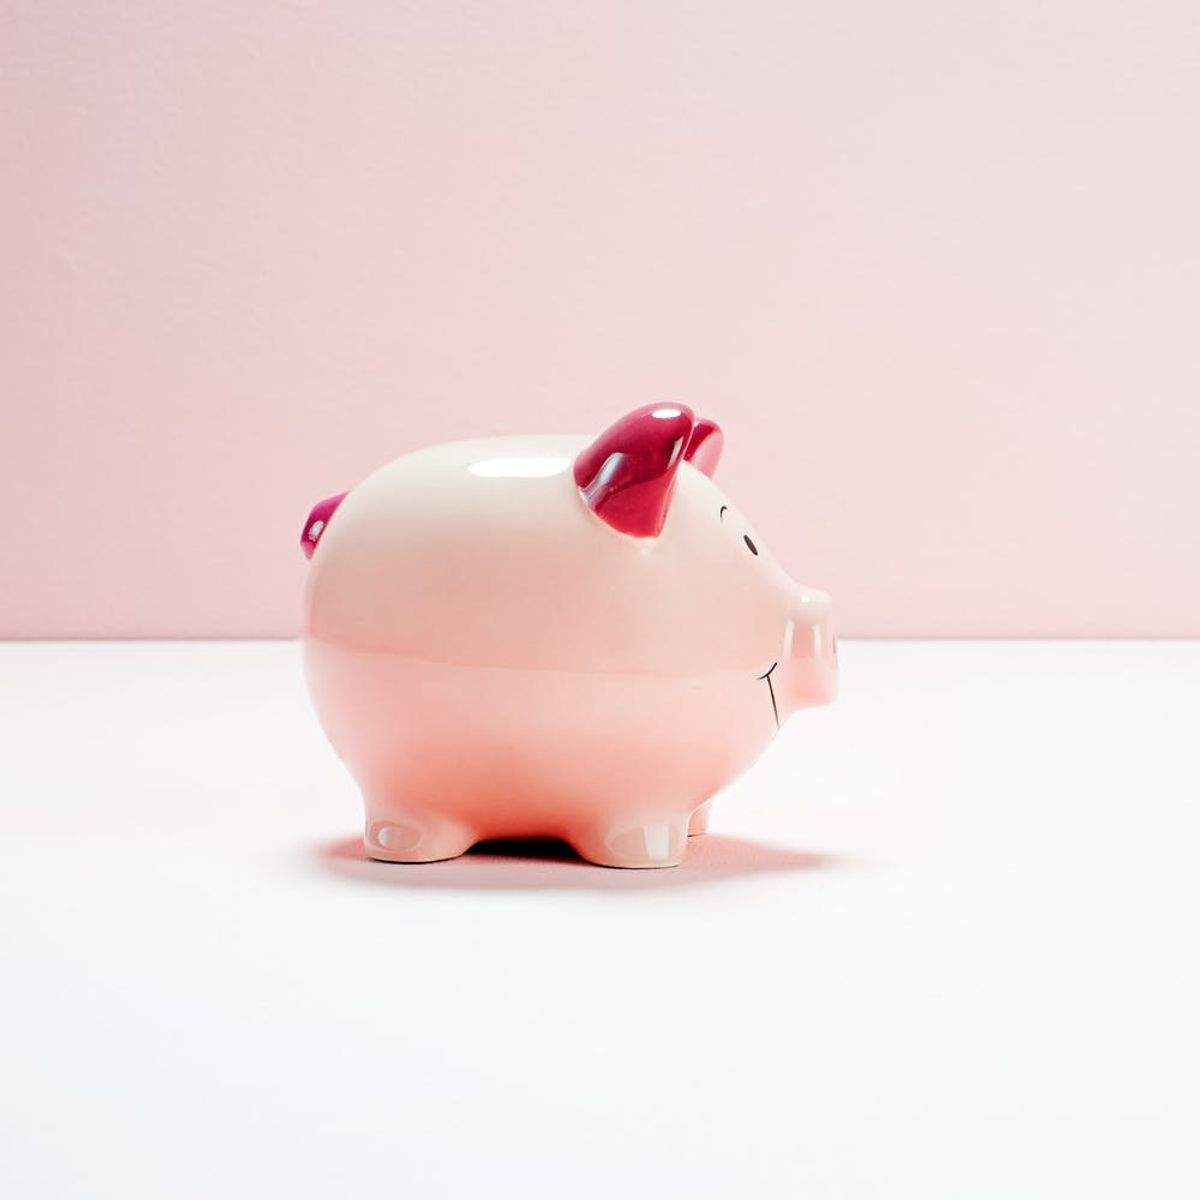 4 Ways to Trick Yourself into Saving More Money Without Even Realizing It